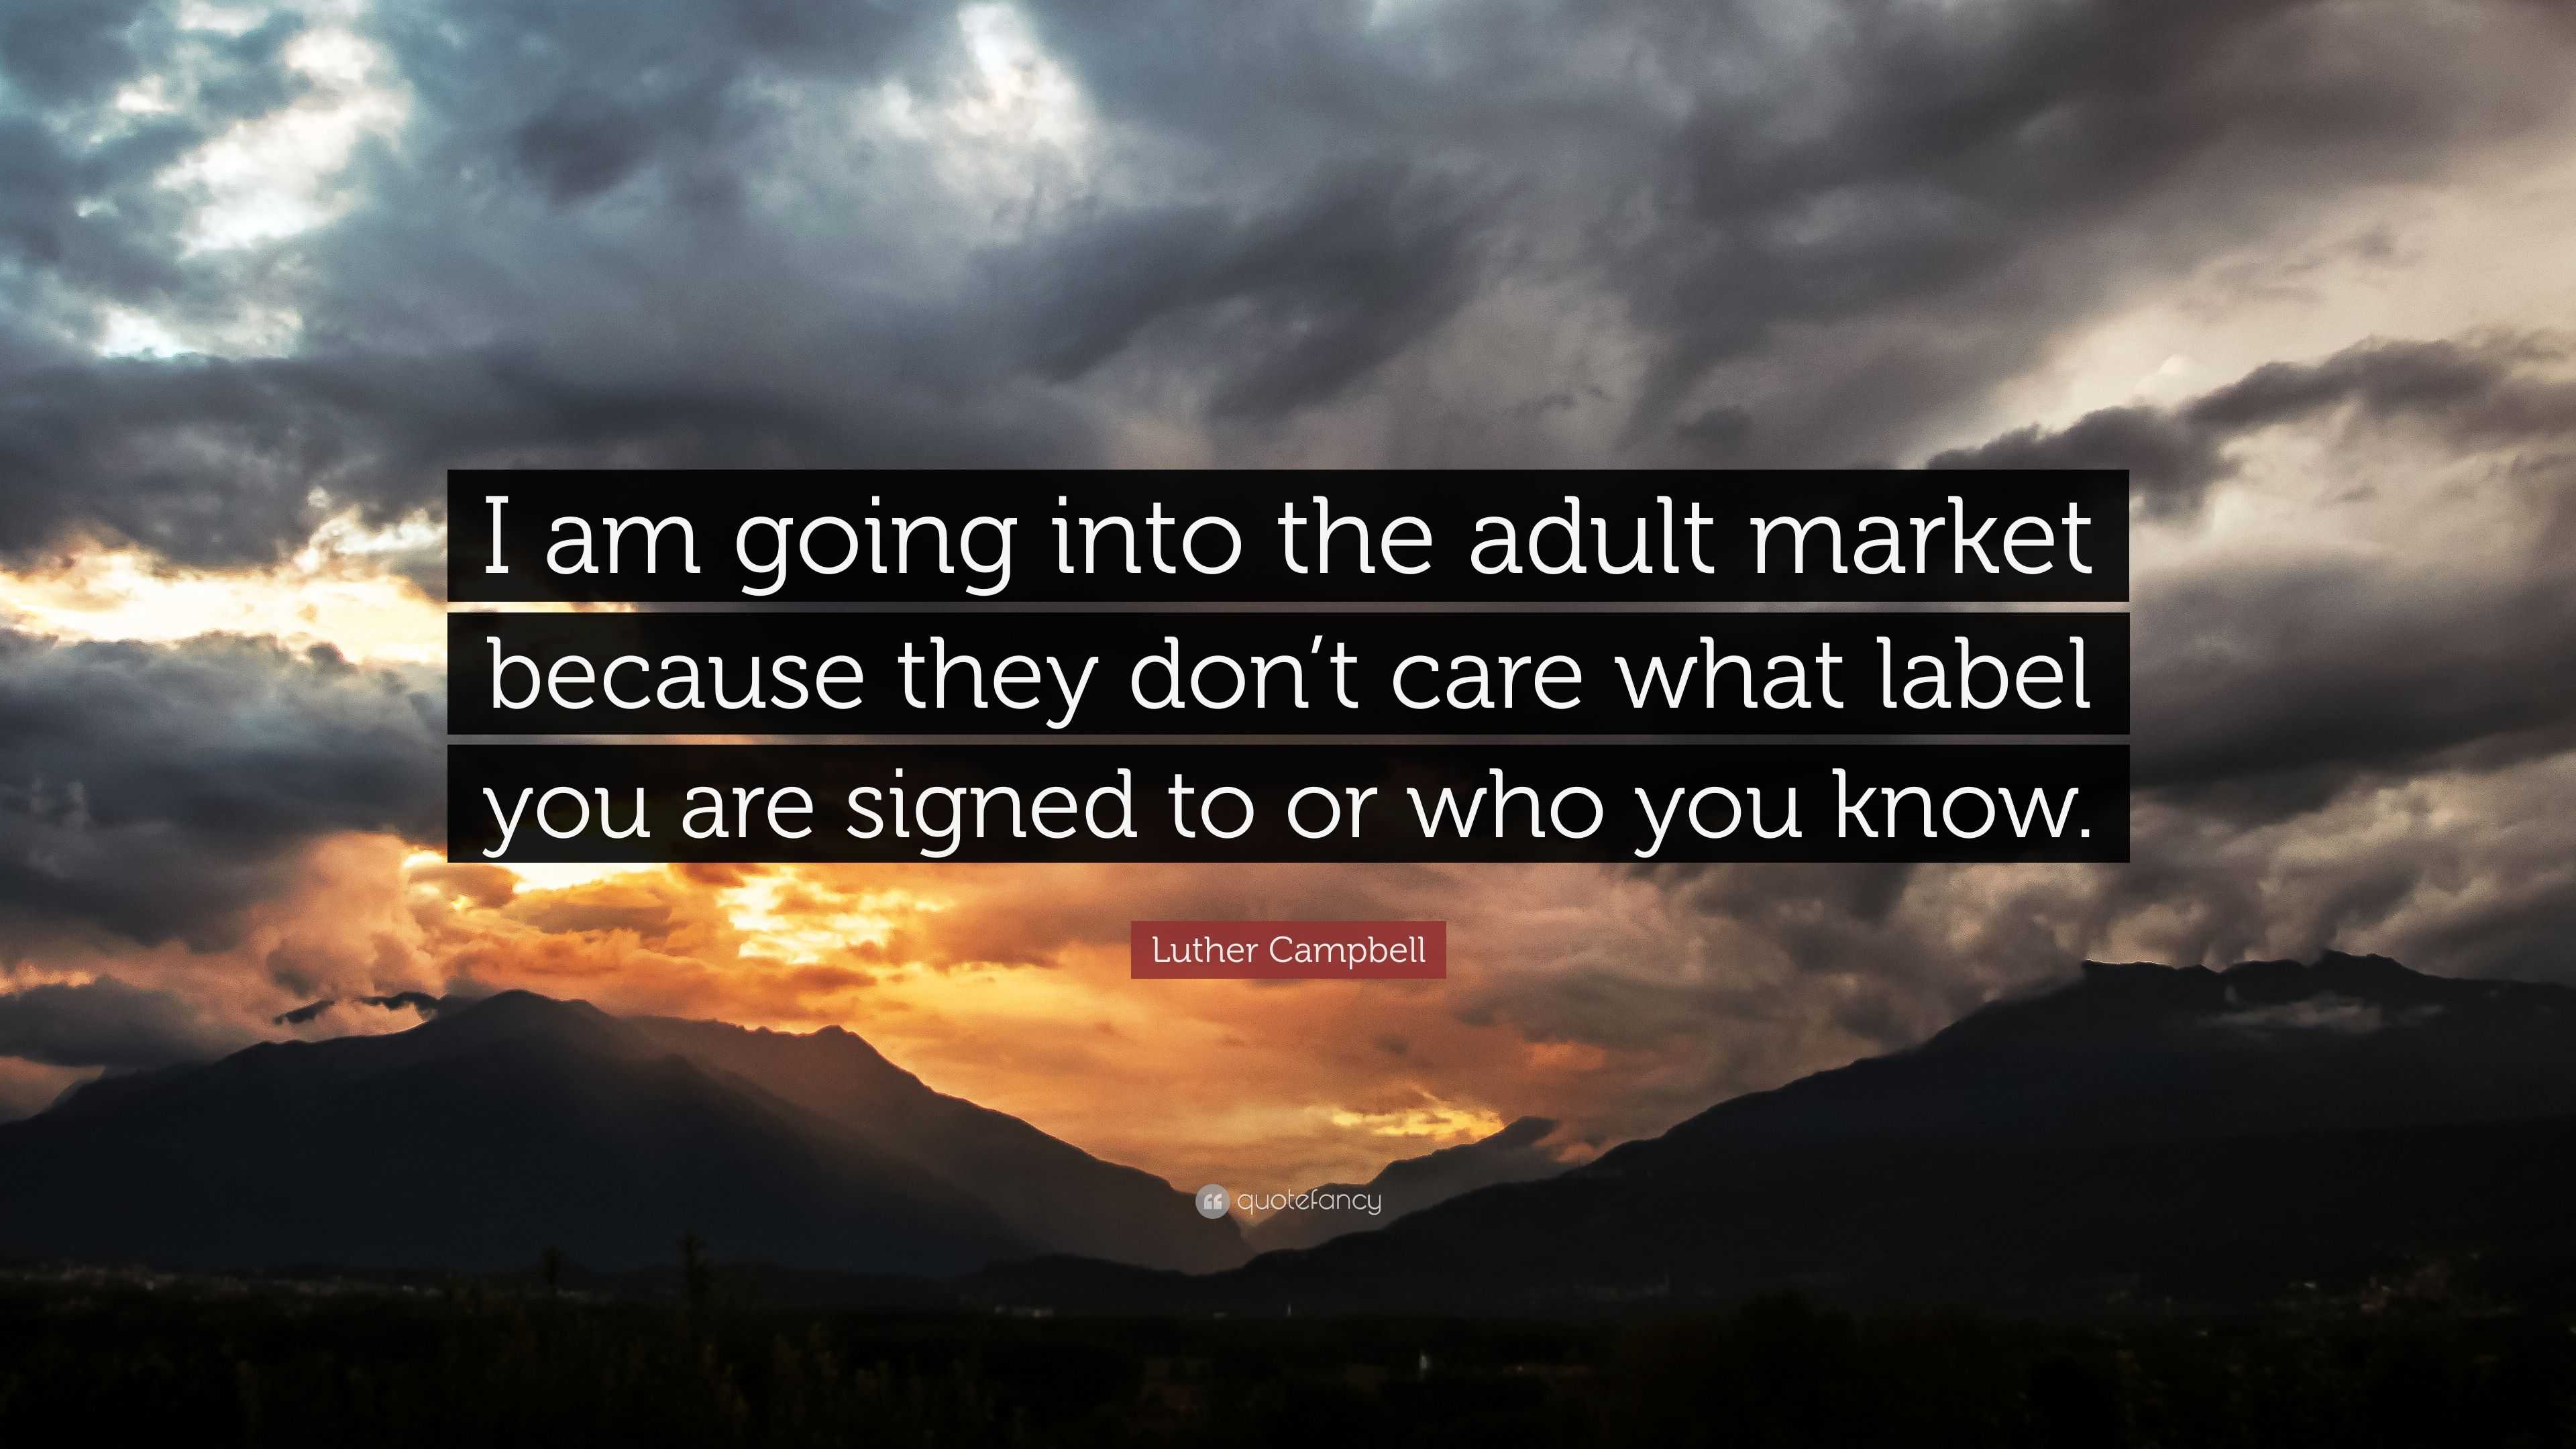 Luther Campbell Quote: “I am going into the adult market because they don't  care what